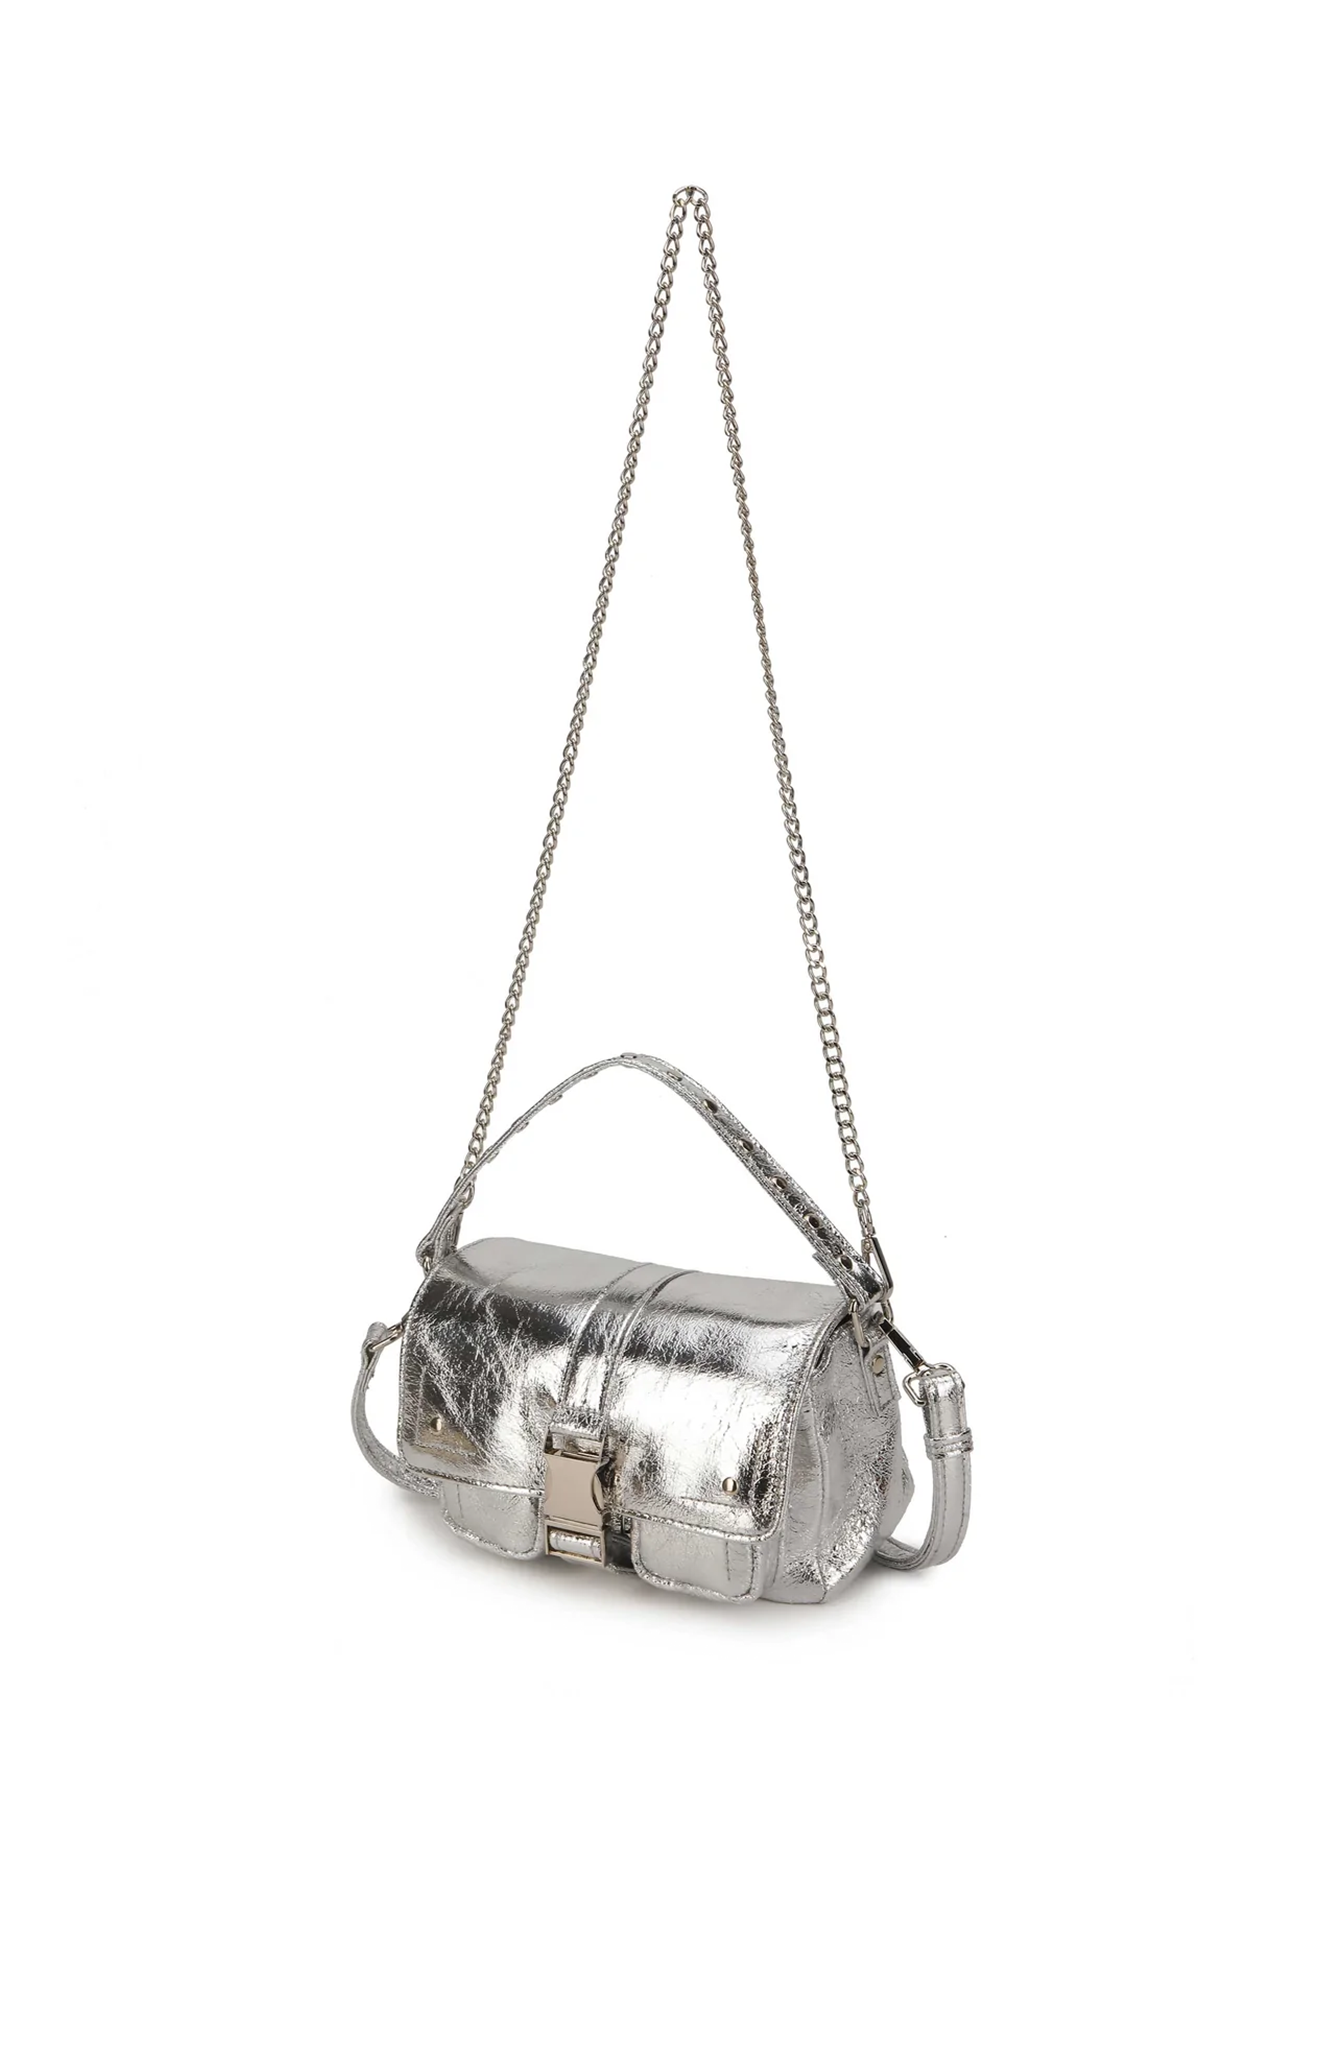 Mini Hilma cross bosy bag by Nunoo closes with a buckle. The bag has two open compartments. The bag comes with a chain and an adjustable strap.